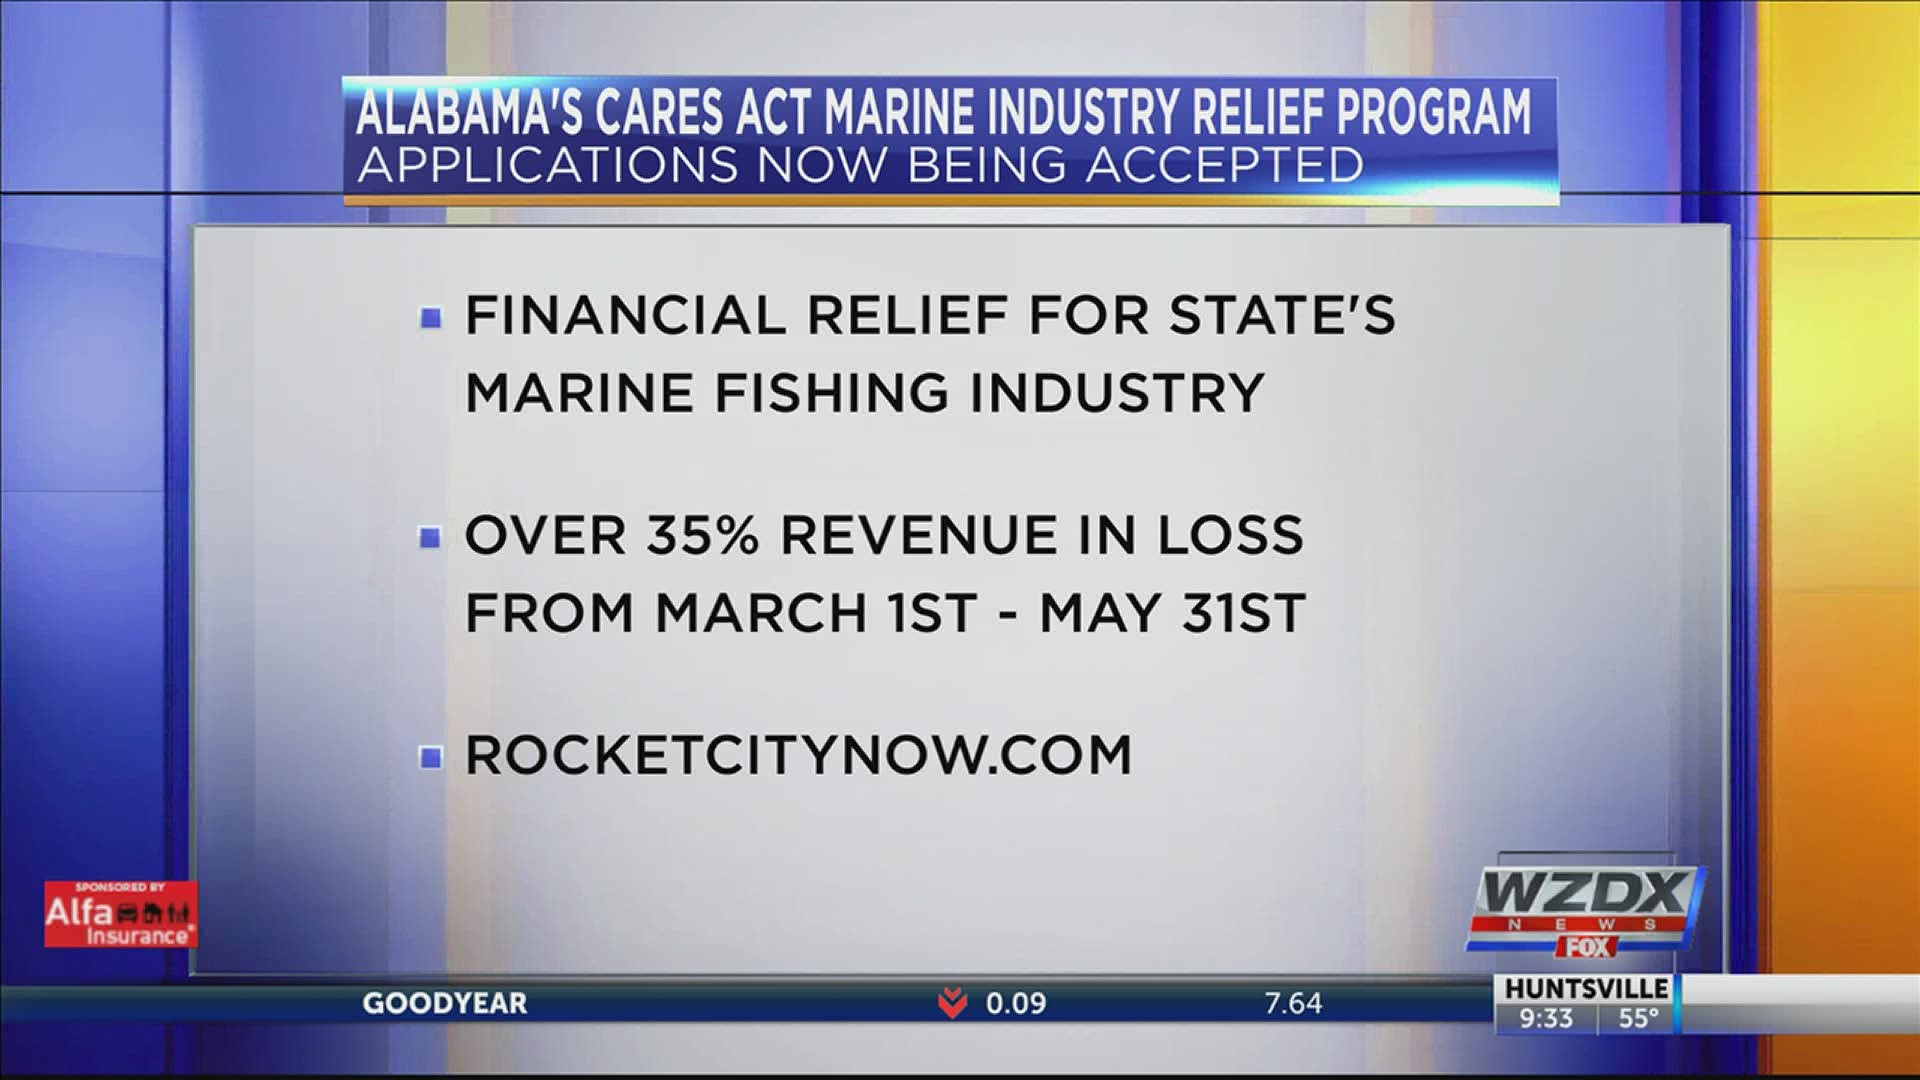 The program is designed to help financial relief due to the impact of COVID-19 on the marine fishing industry in Alabama.